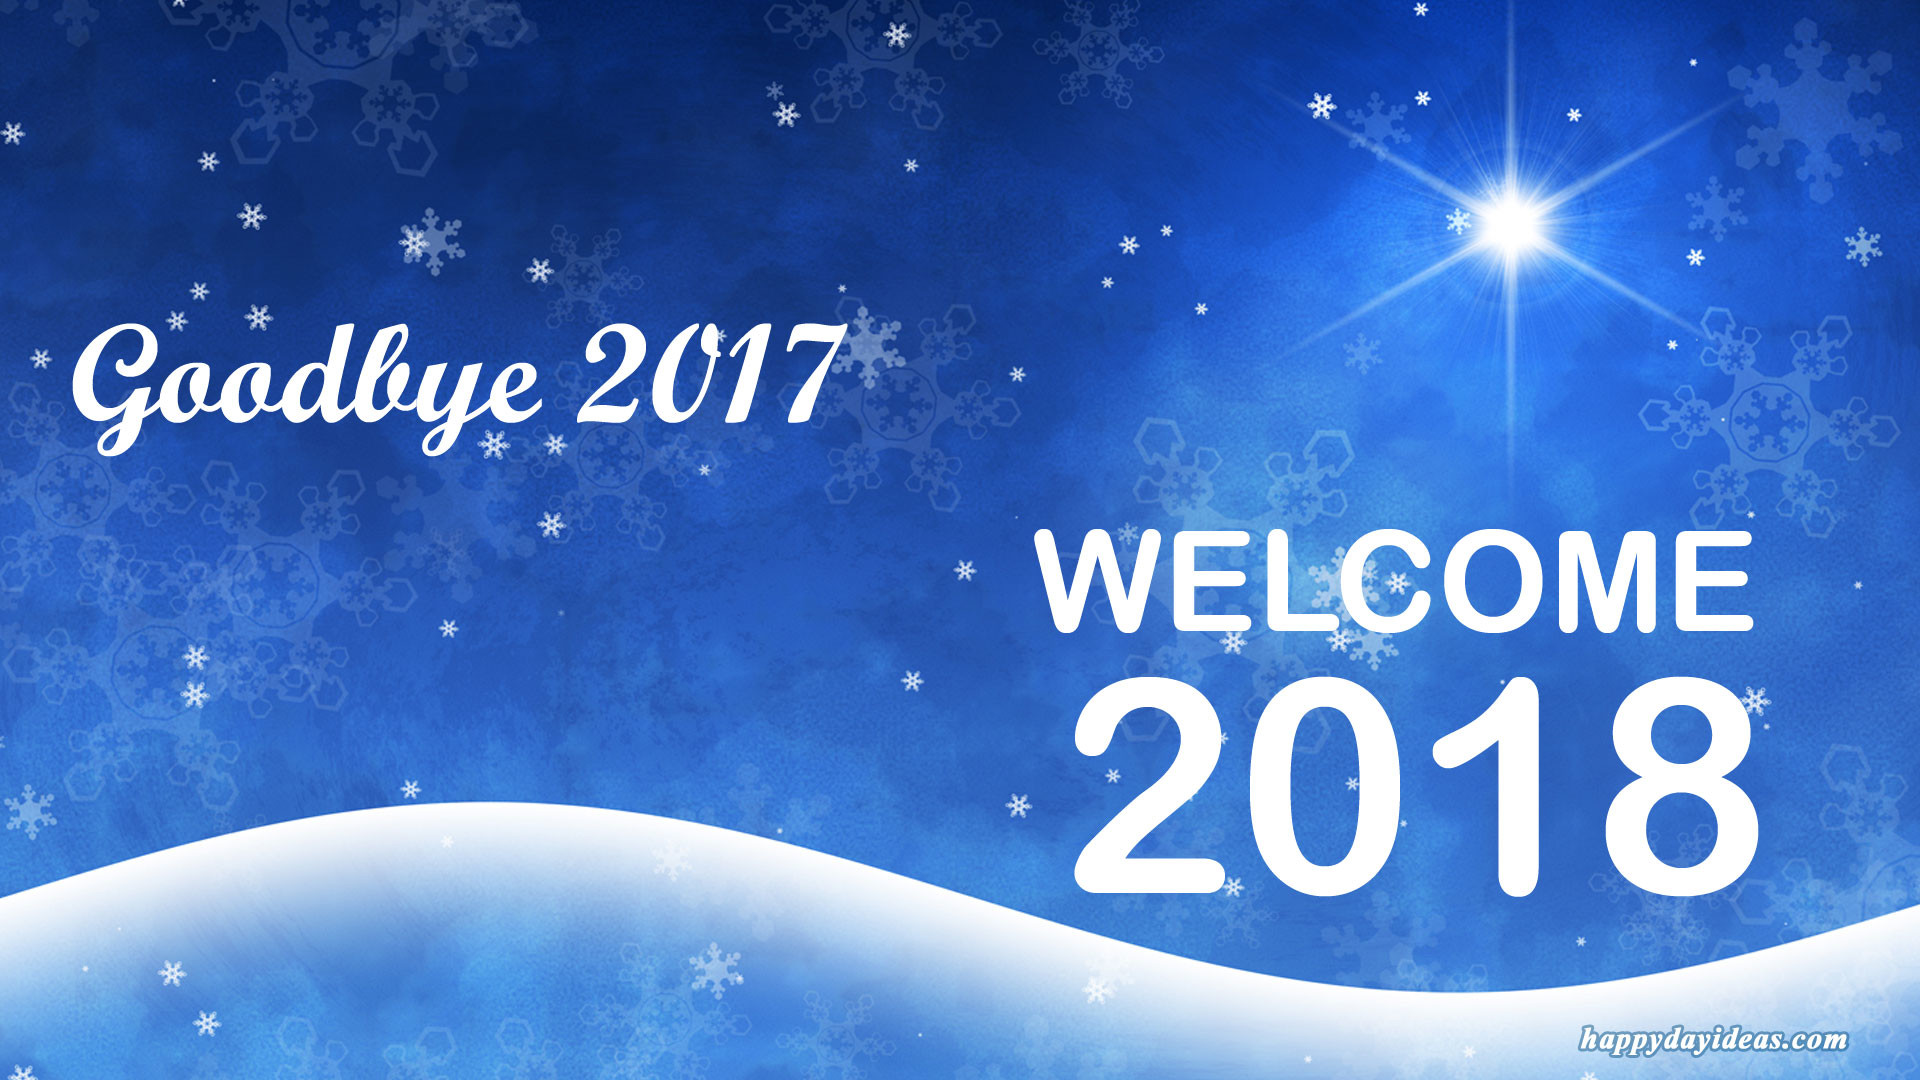 1920x1080 ... Goodbye 2017 Welcome 2018 images wallpaper and quotes